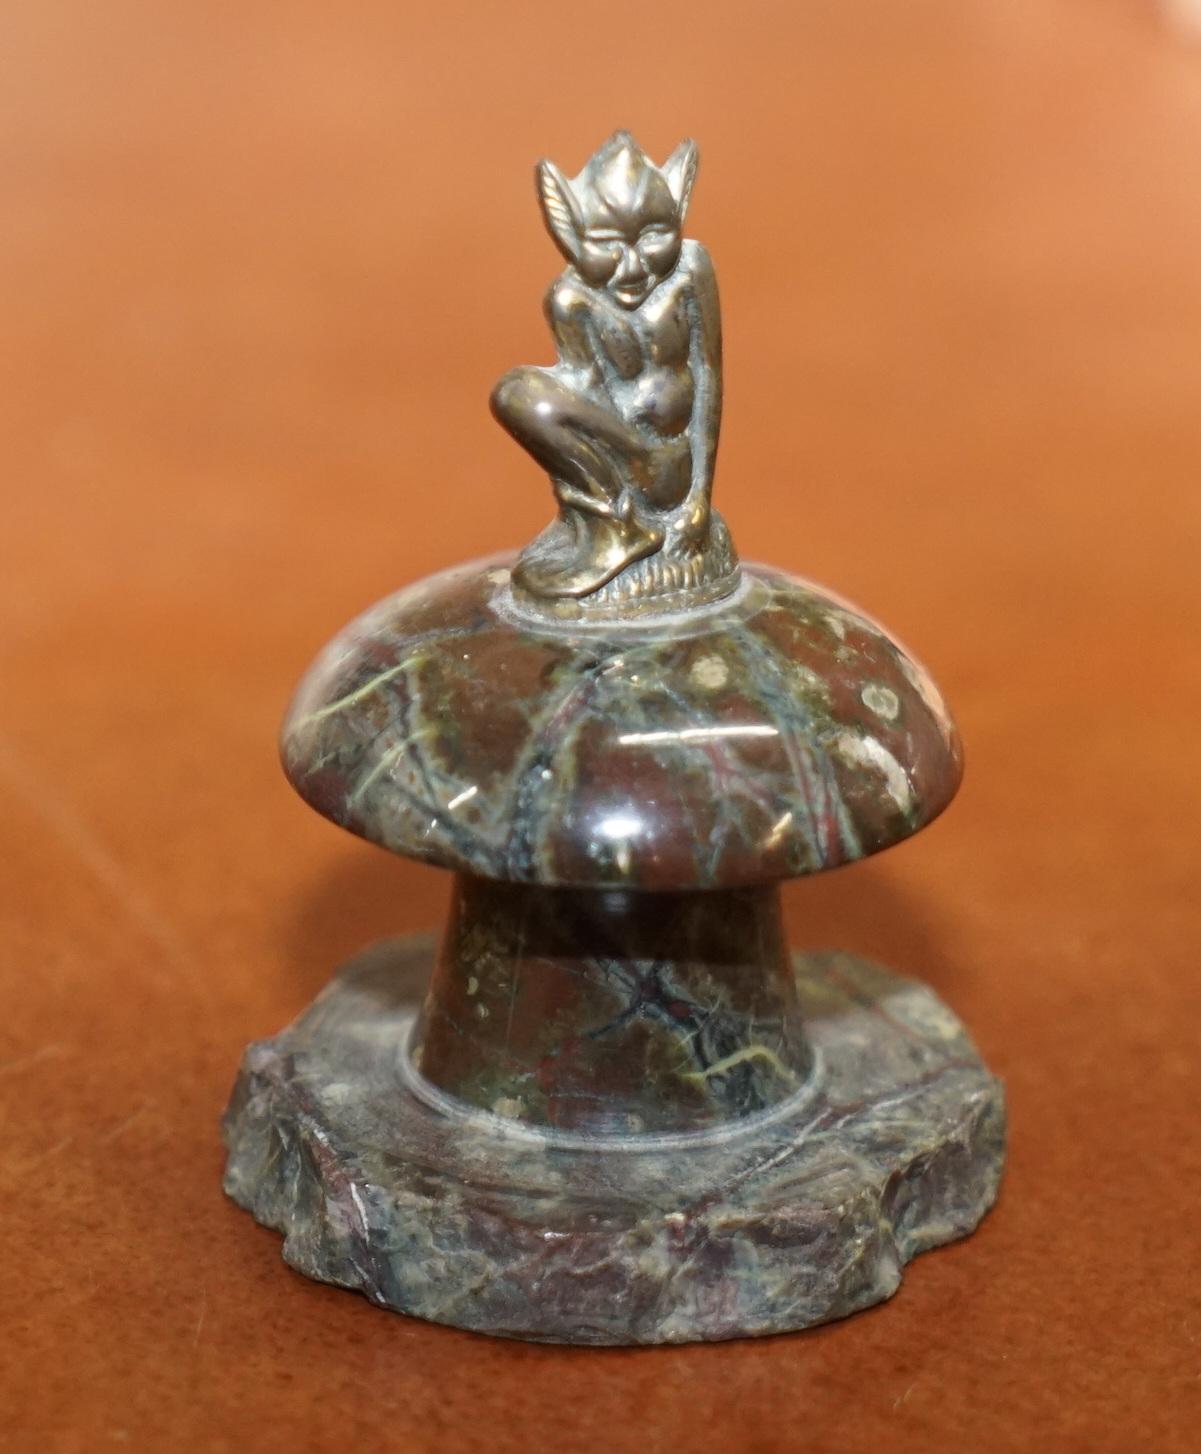 Art Deco Small Marble Statue with a Little Bronze Pixy Sitting on Top of a Polished Rock